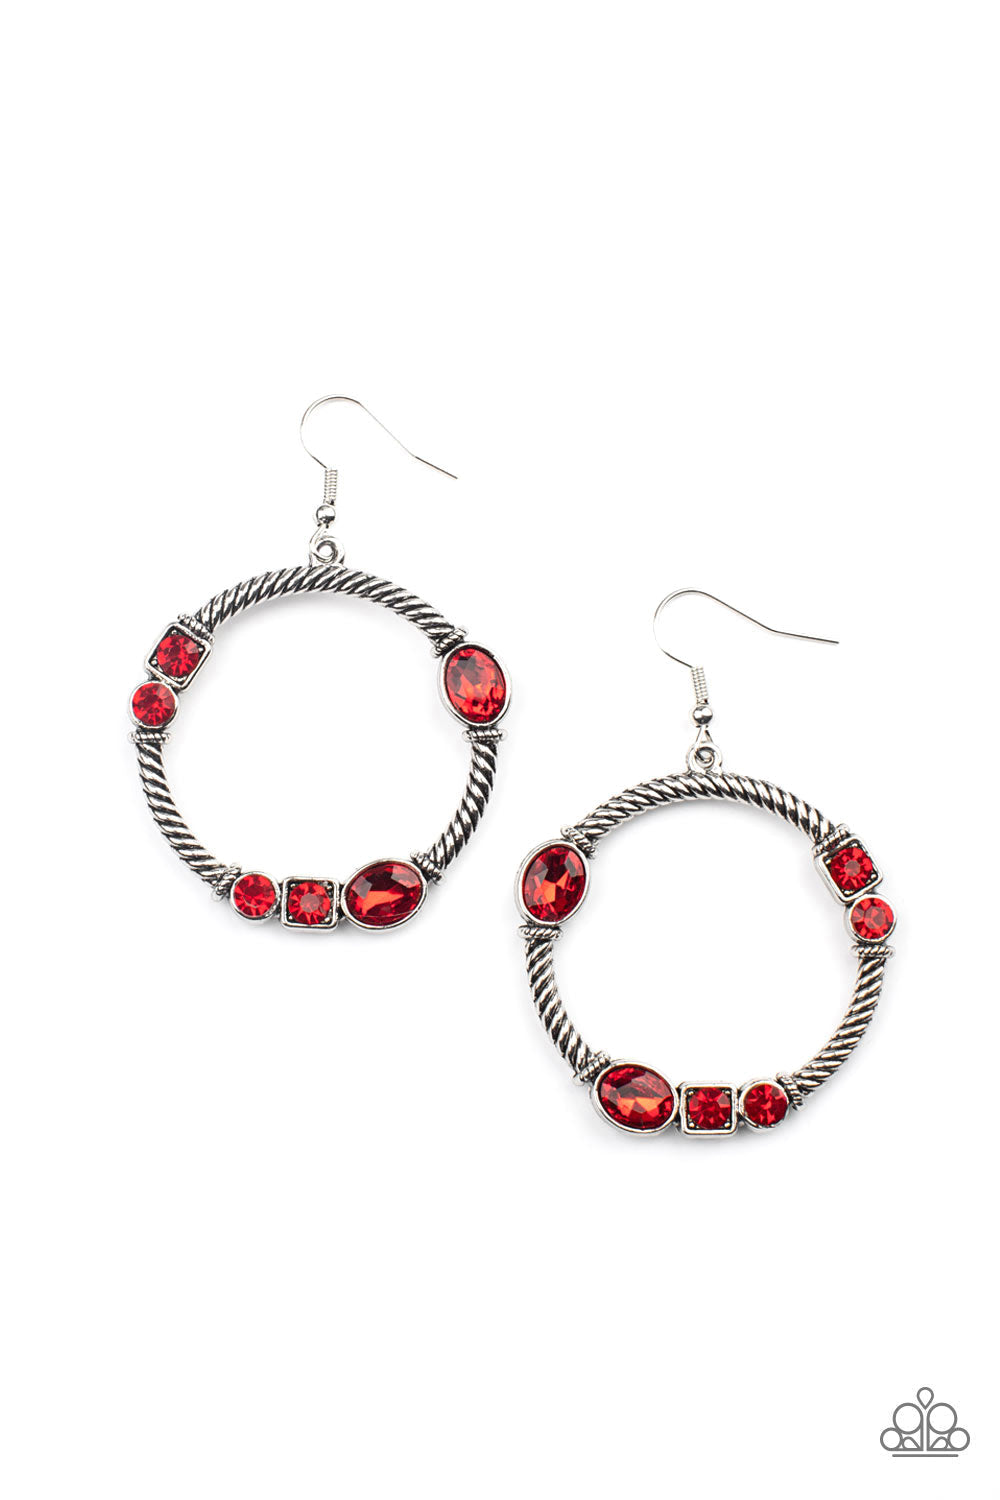 Glamorous Garland - Red and Silver Earrings - Paparazzi Accessories - Featuring round, oval, and square cuts, a collection of fiery red rhinestones haphazardly adorn the front of a textured silver hoop, for a gritty-glamorous stylish fashion earrings. 